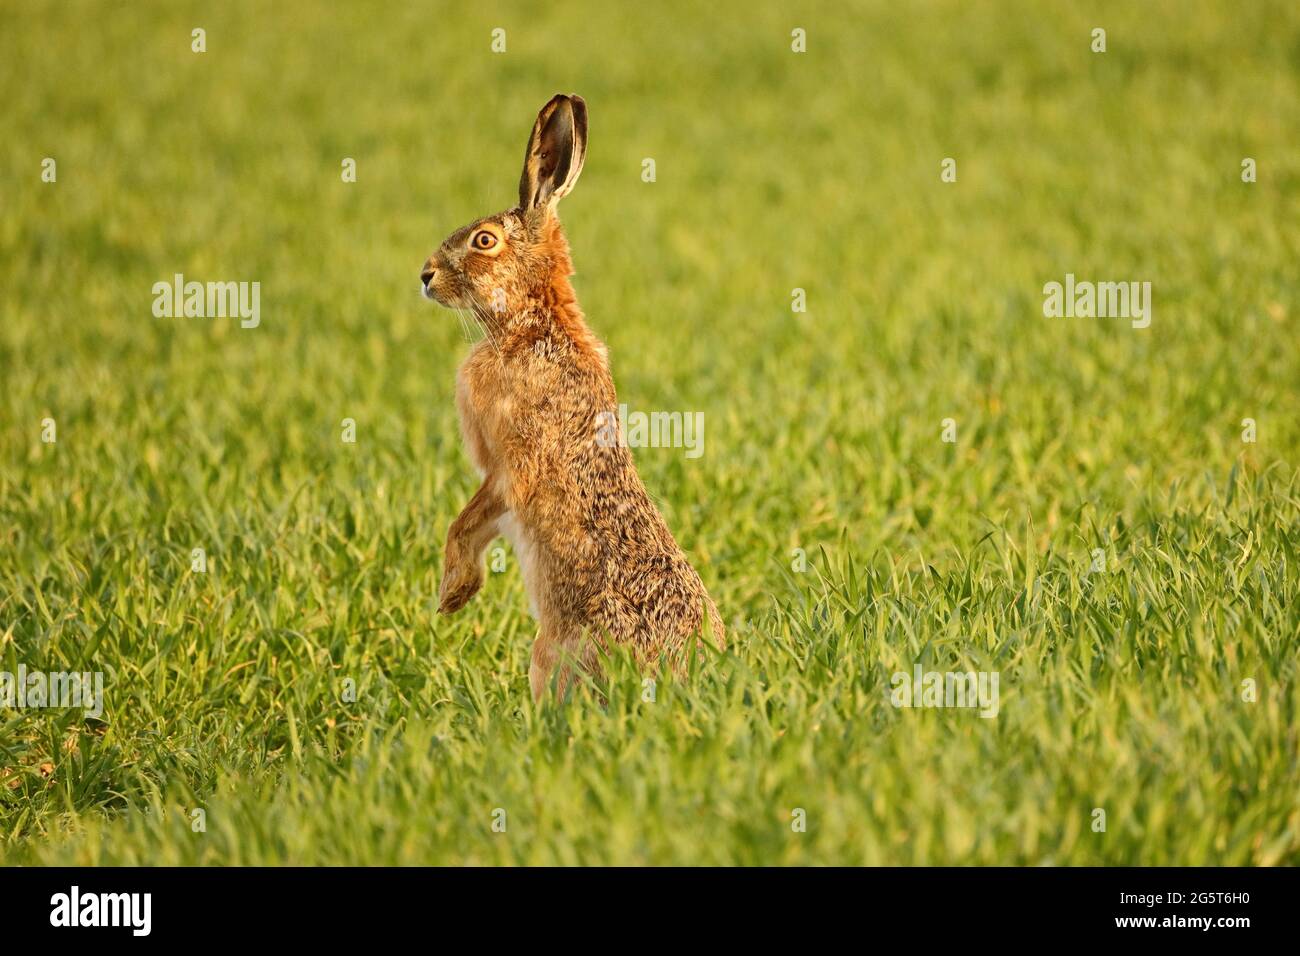 European hare, Brown hare (Lepus europaeus), stands erect in a field, Germany, Baden-Wuerttemberg Stock Photo